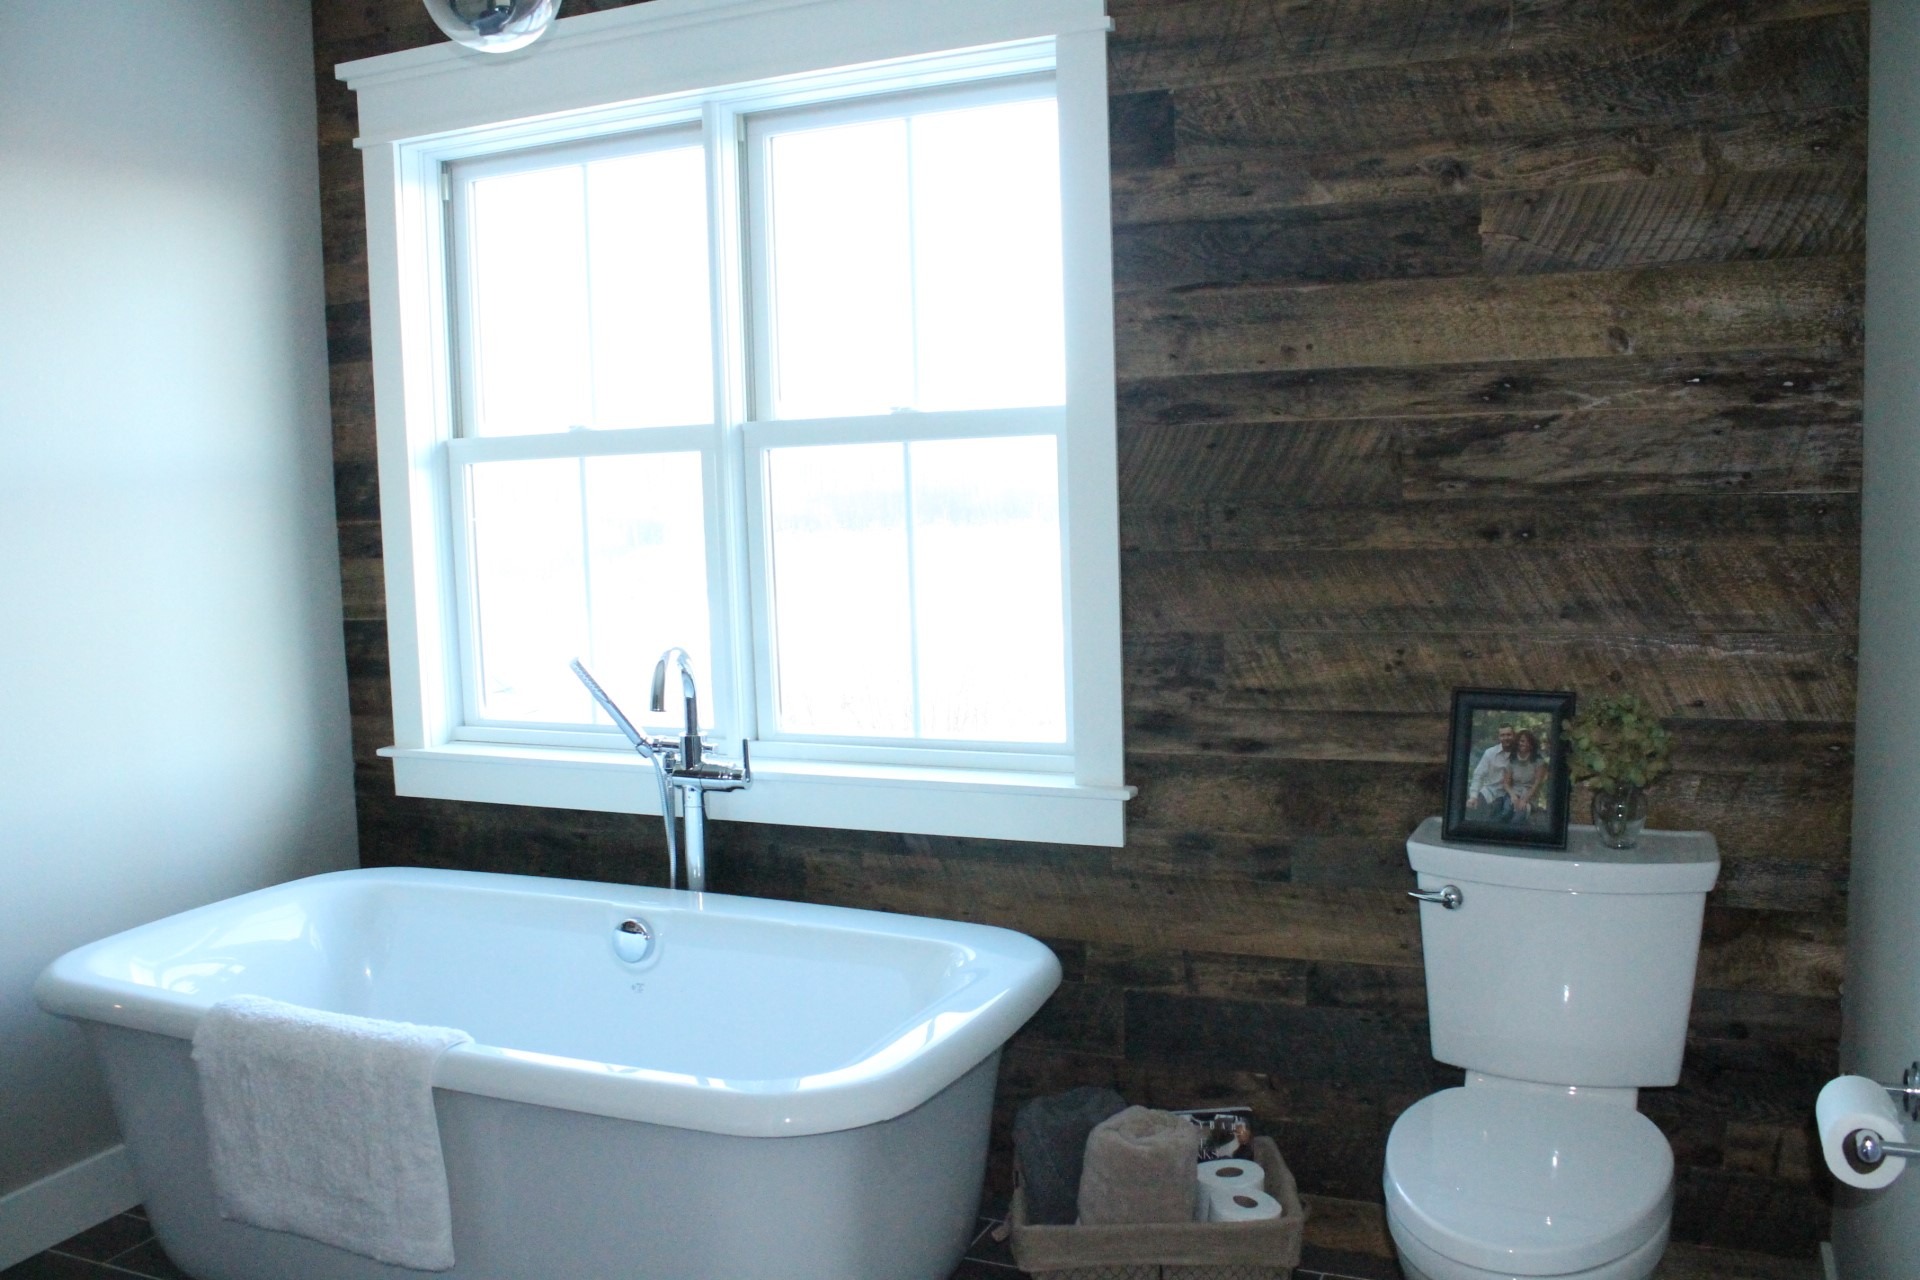 Reclaim style wood accent wall complements the crisp white walls and fixtures.